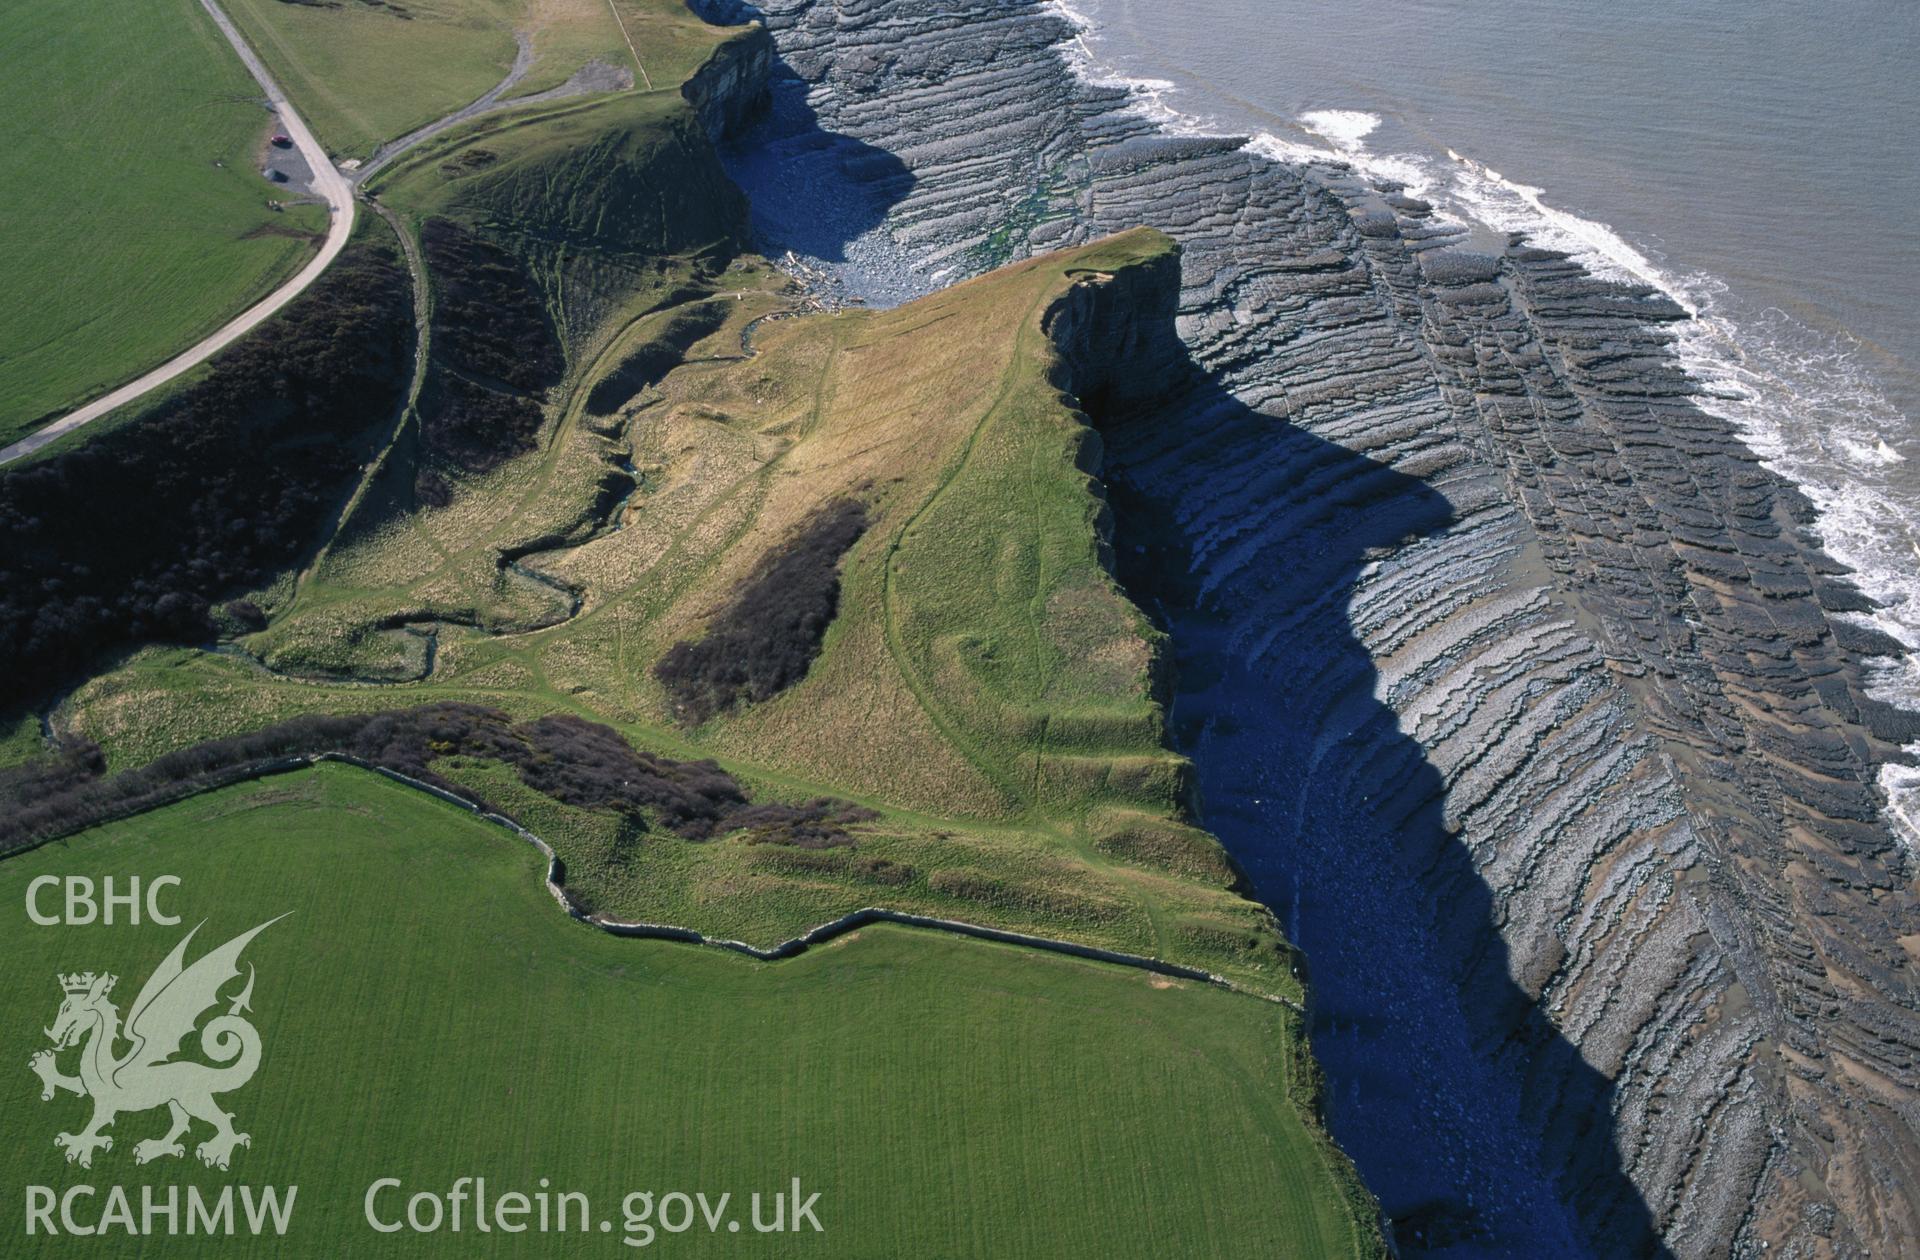 RCAHMW colour oblique aerial photograph of Nash Point Promontory Fort taken on 29/03/1995 by C.R. Musson